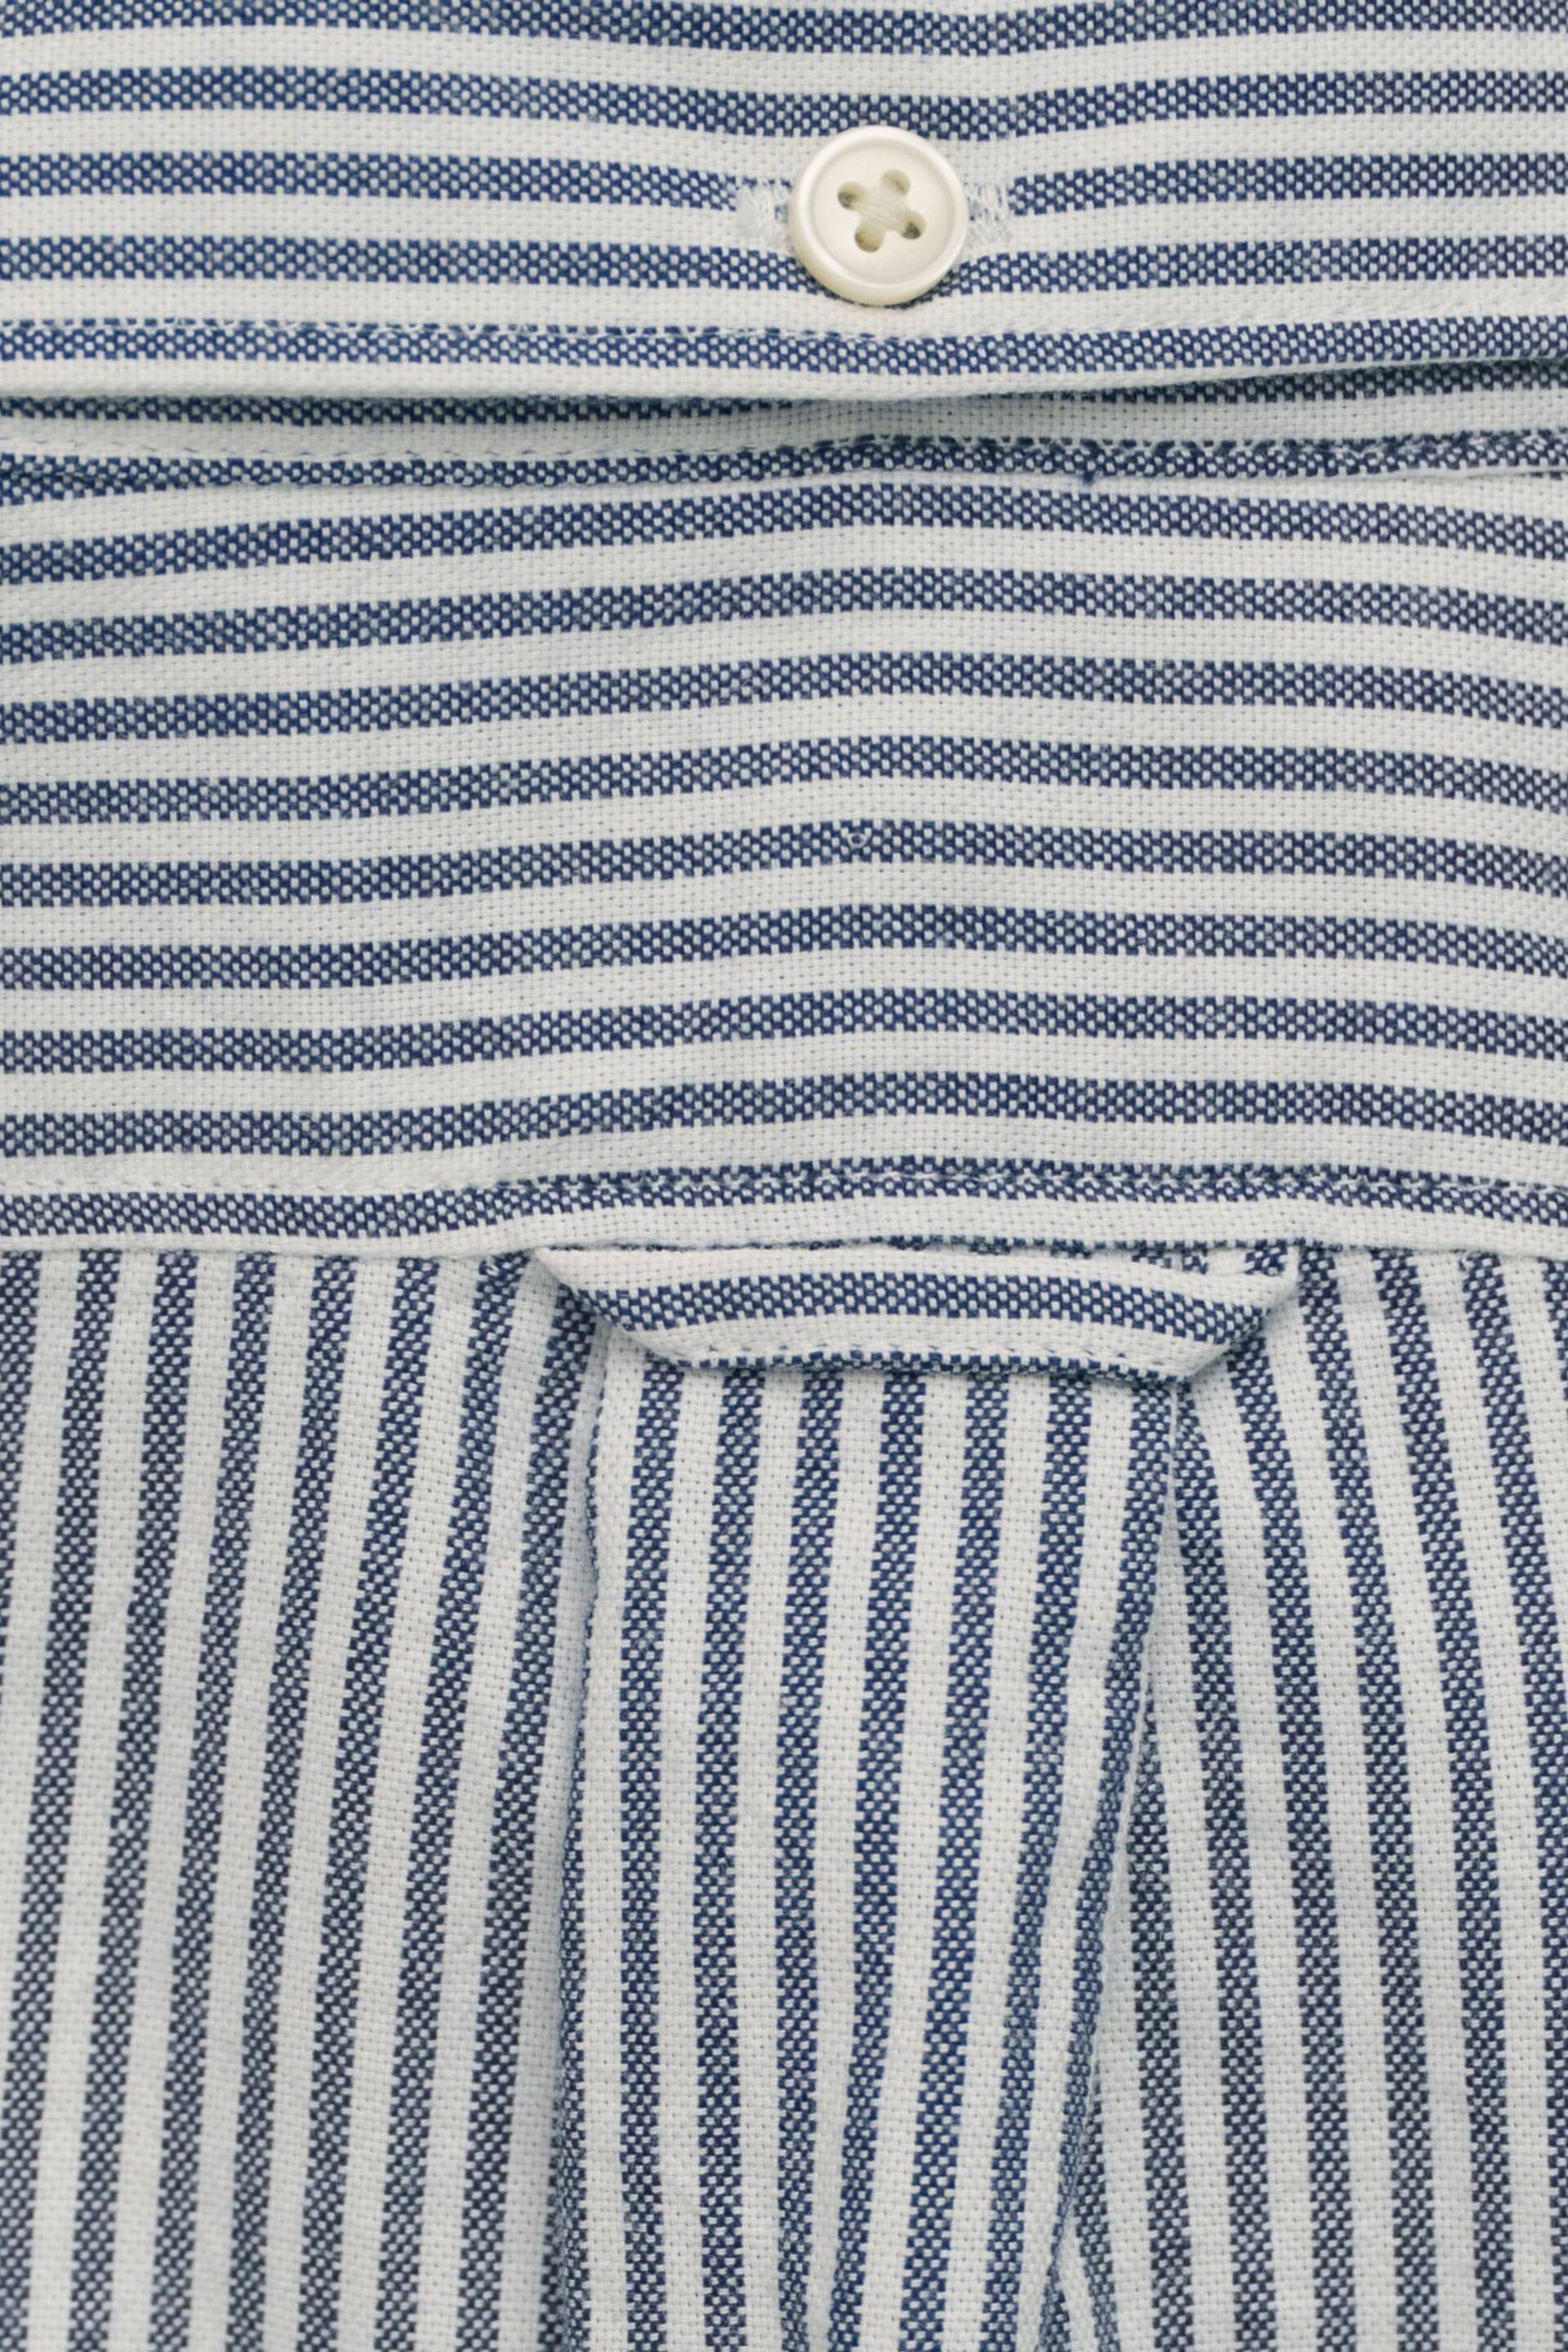 GANT Baby Blue Striped Oxford Shirt - Image 3 of 3